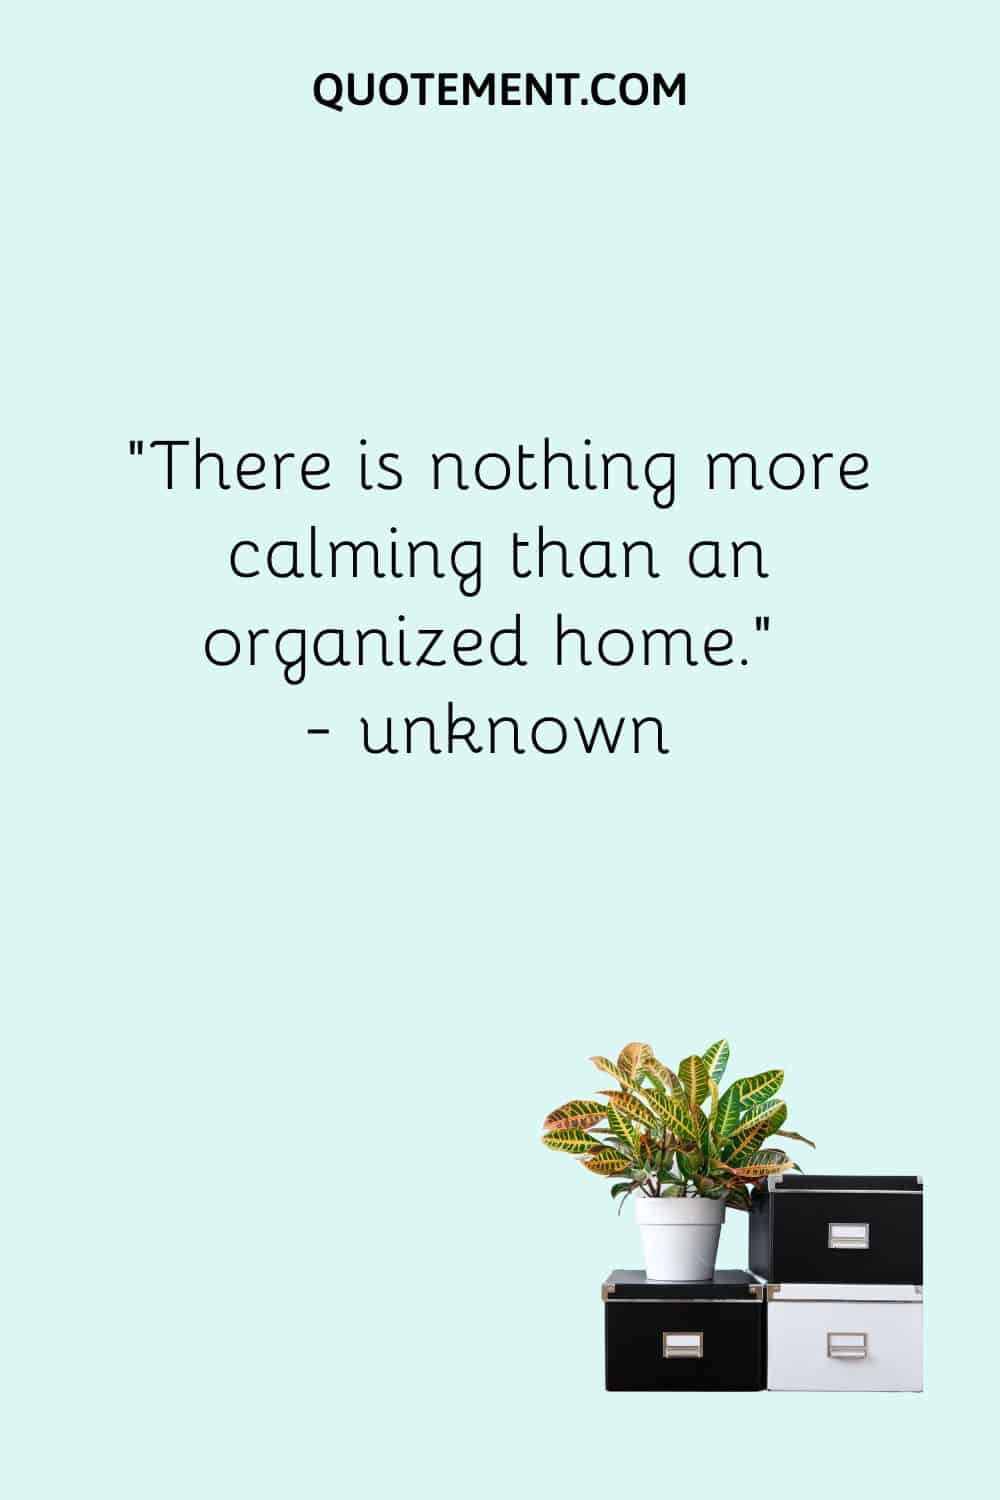 There is nothing more calming than an organized home